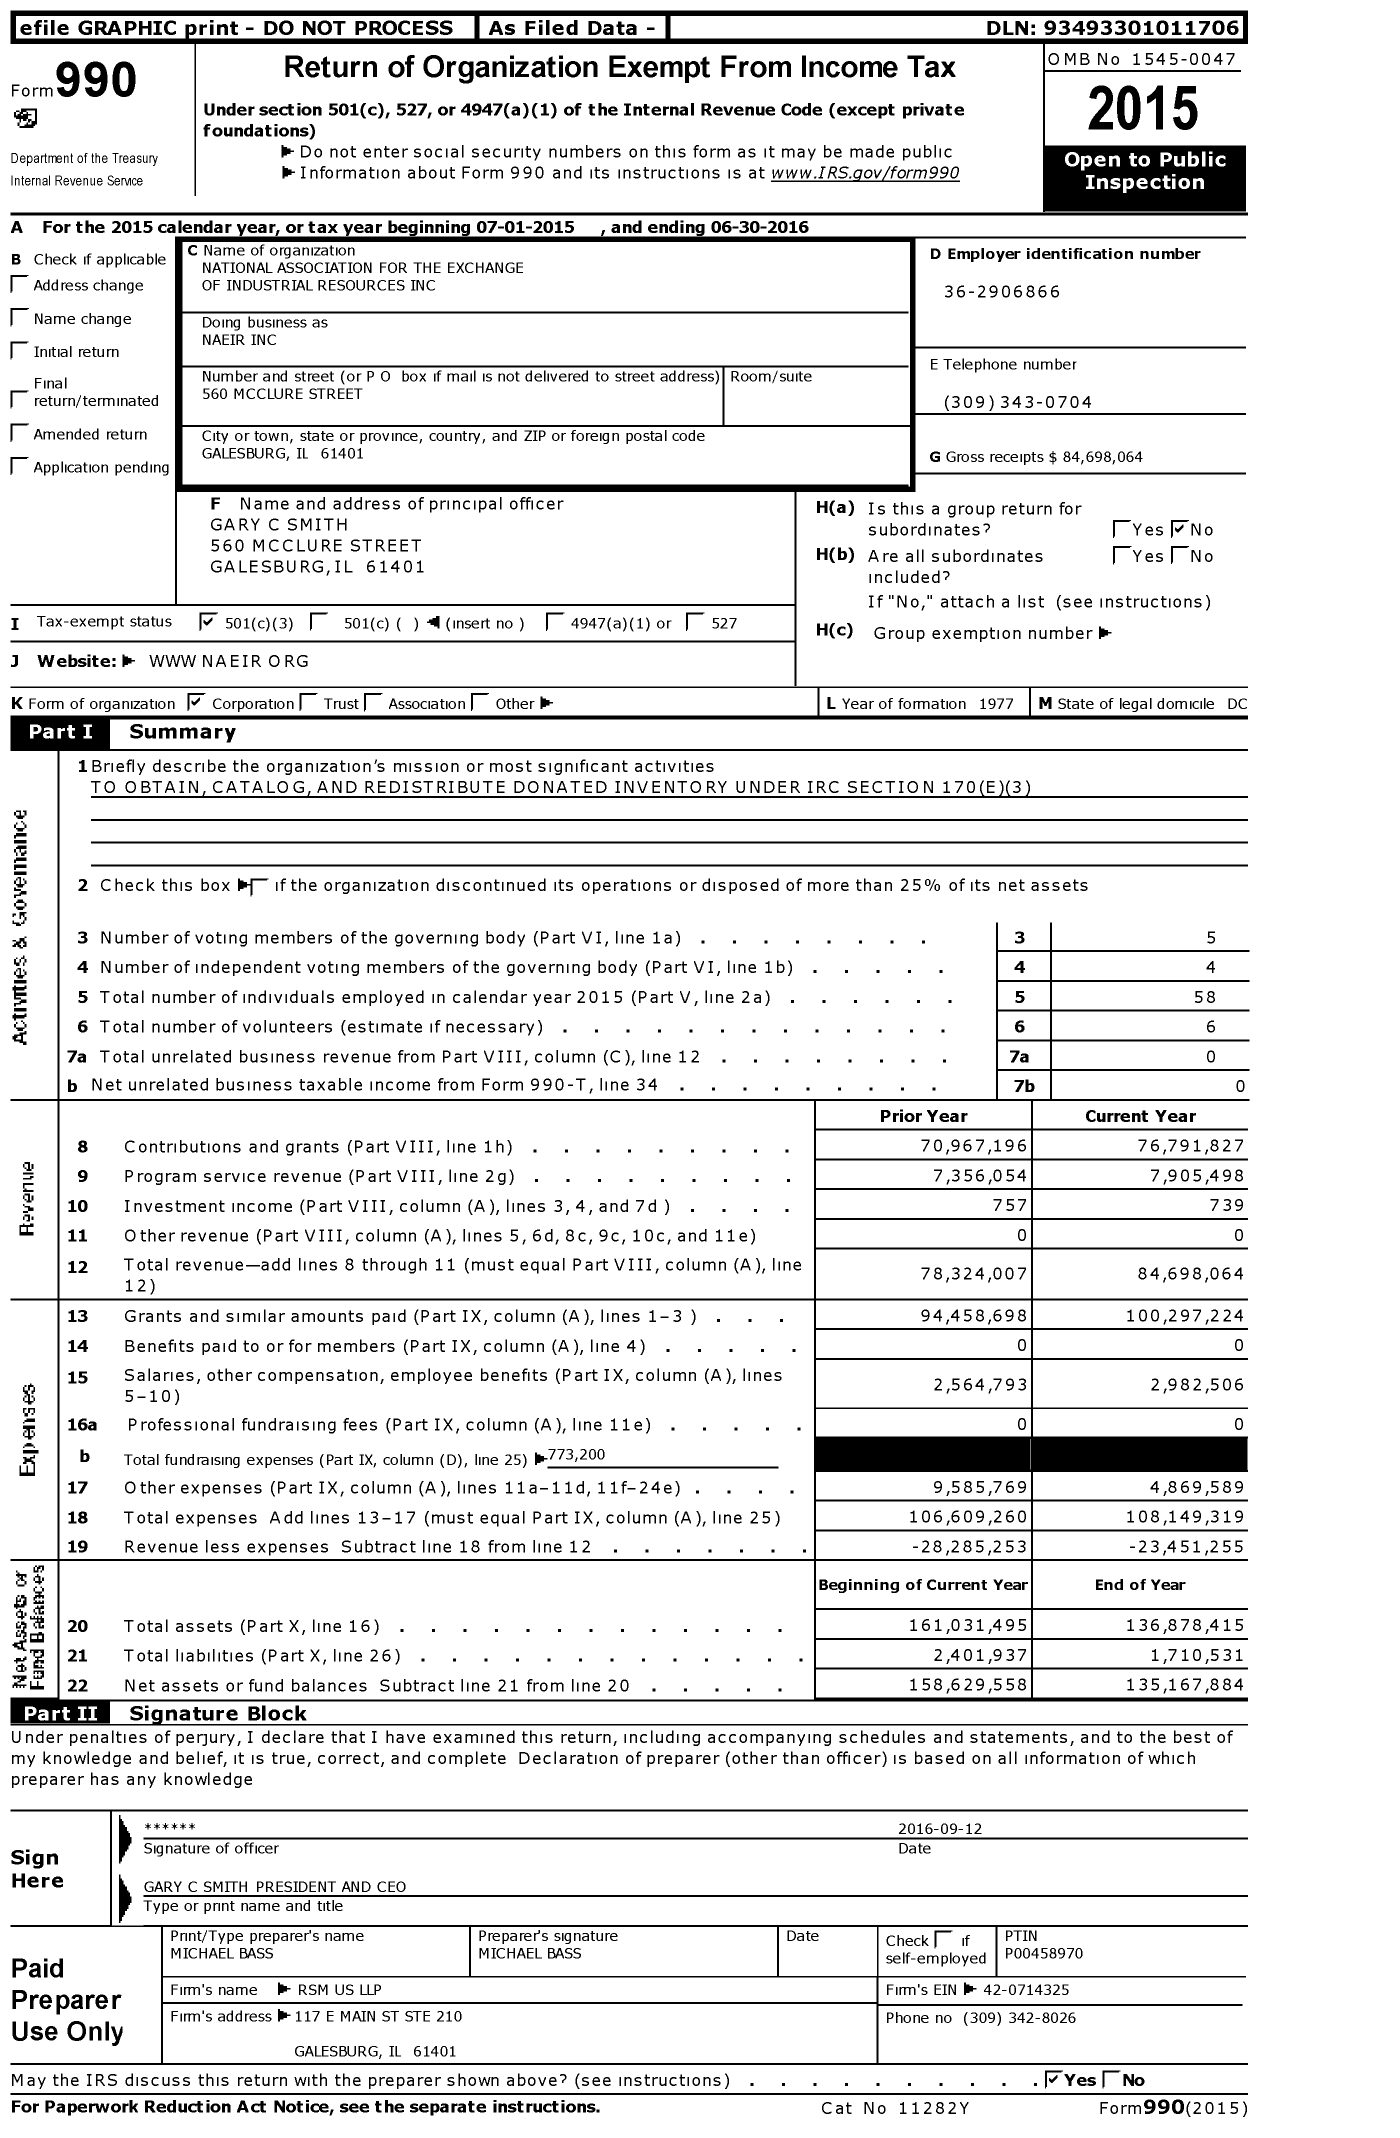 Image of first page of 2015 Form 990 for National Association for the Exchange of Industrial Resources (NAEIR)